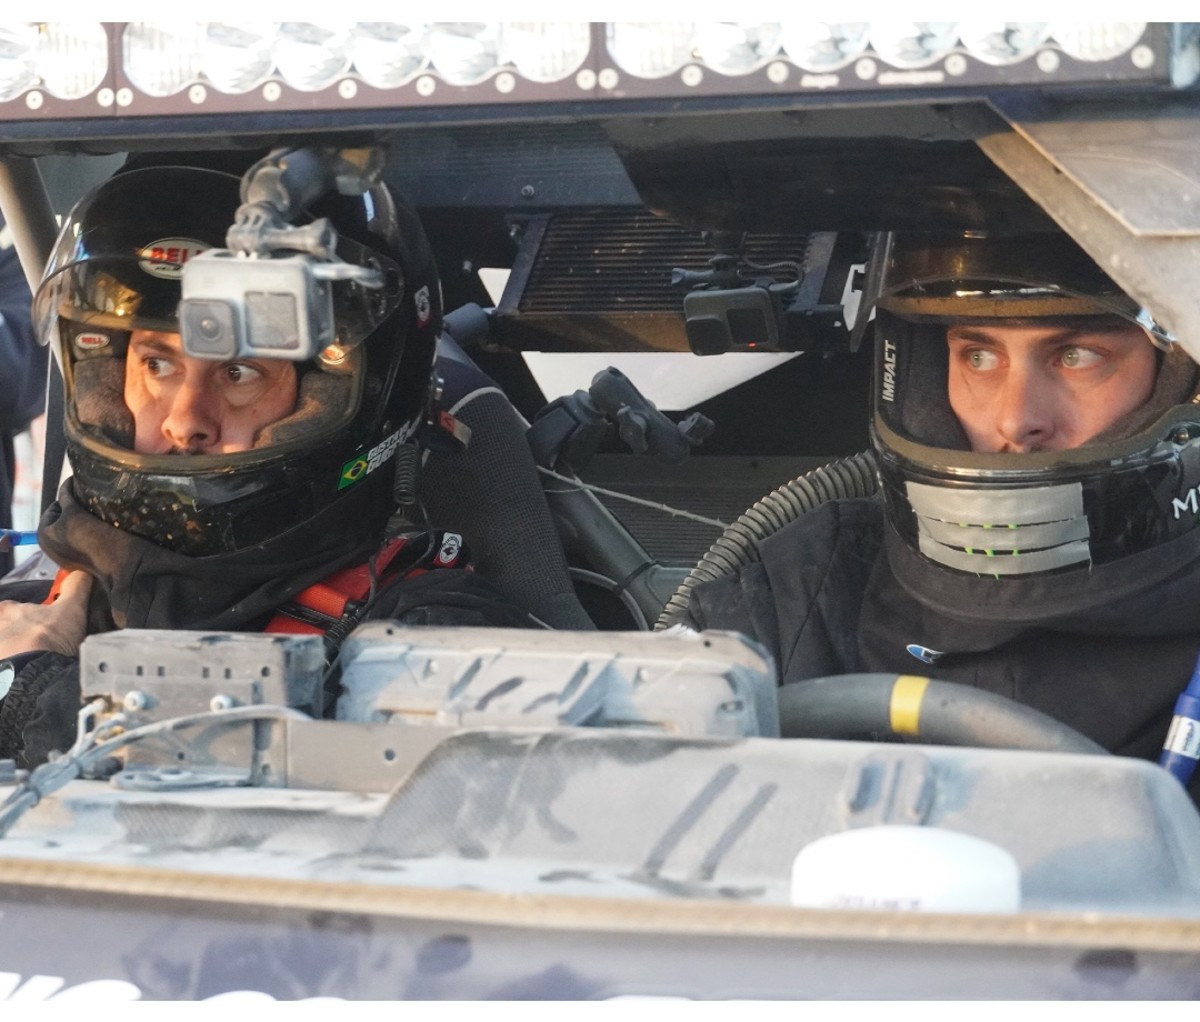 Two desert race car drivers in full gear with serious expressions before an off-road race.